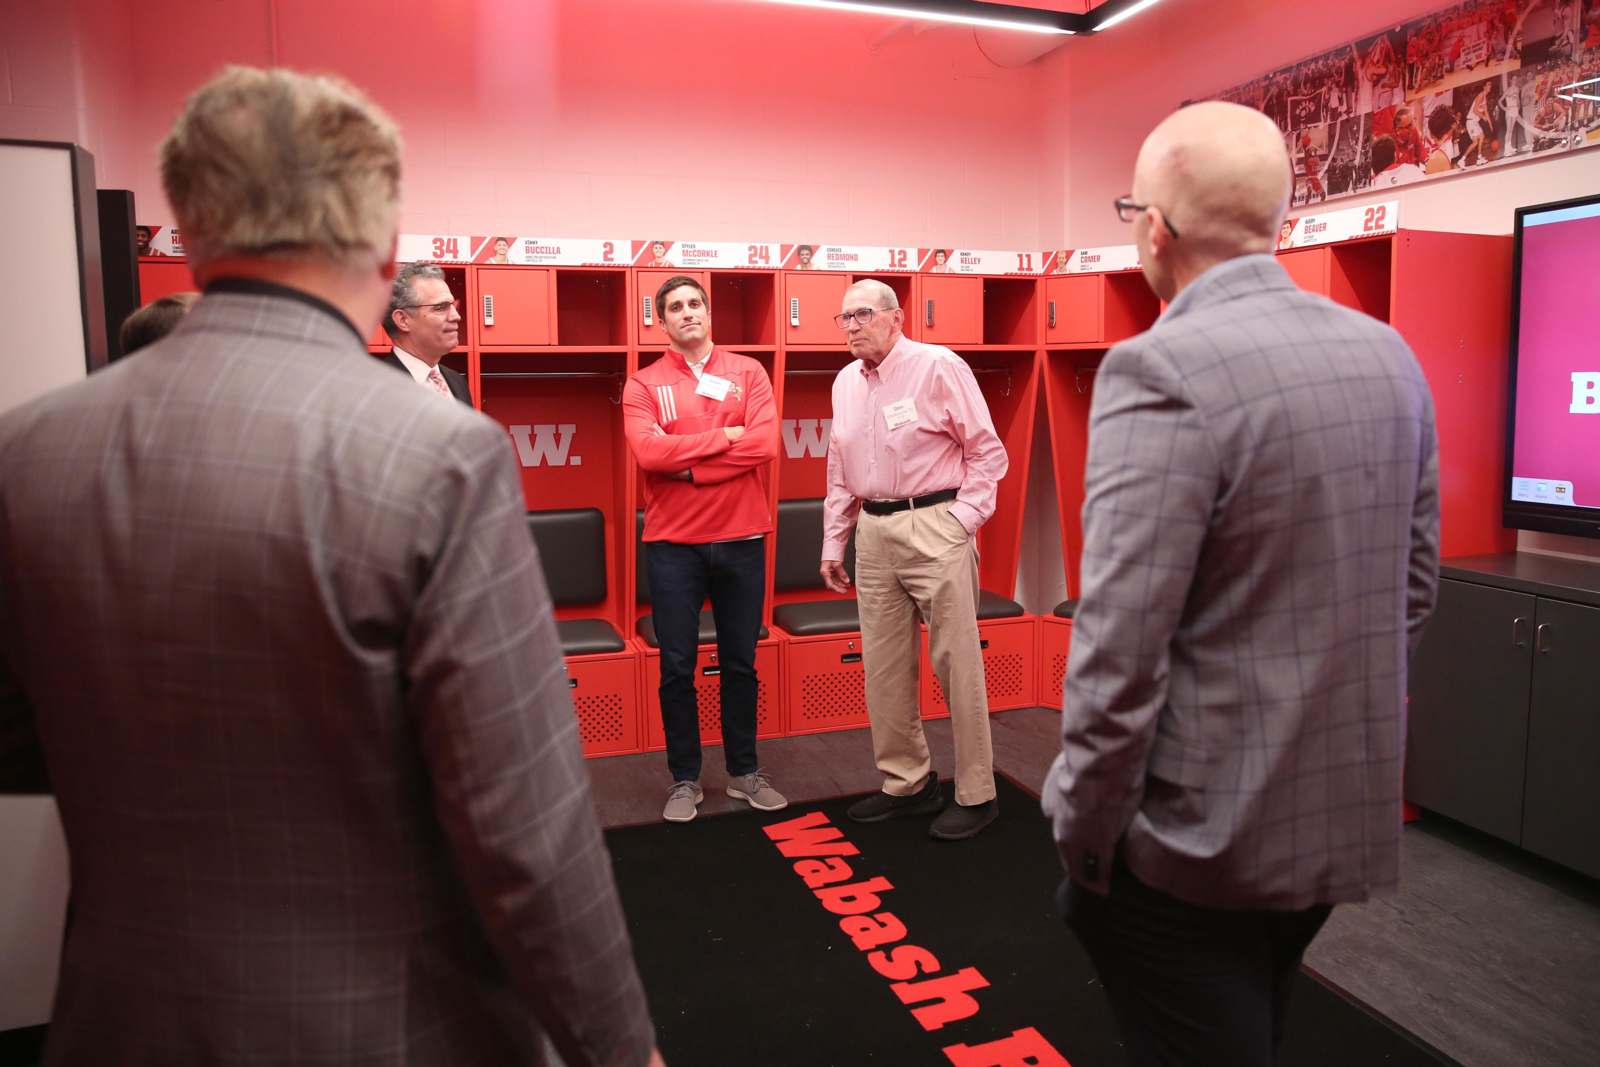 a group of men standing in a locker room